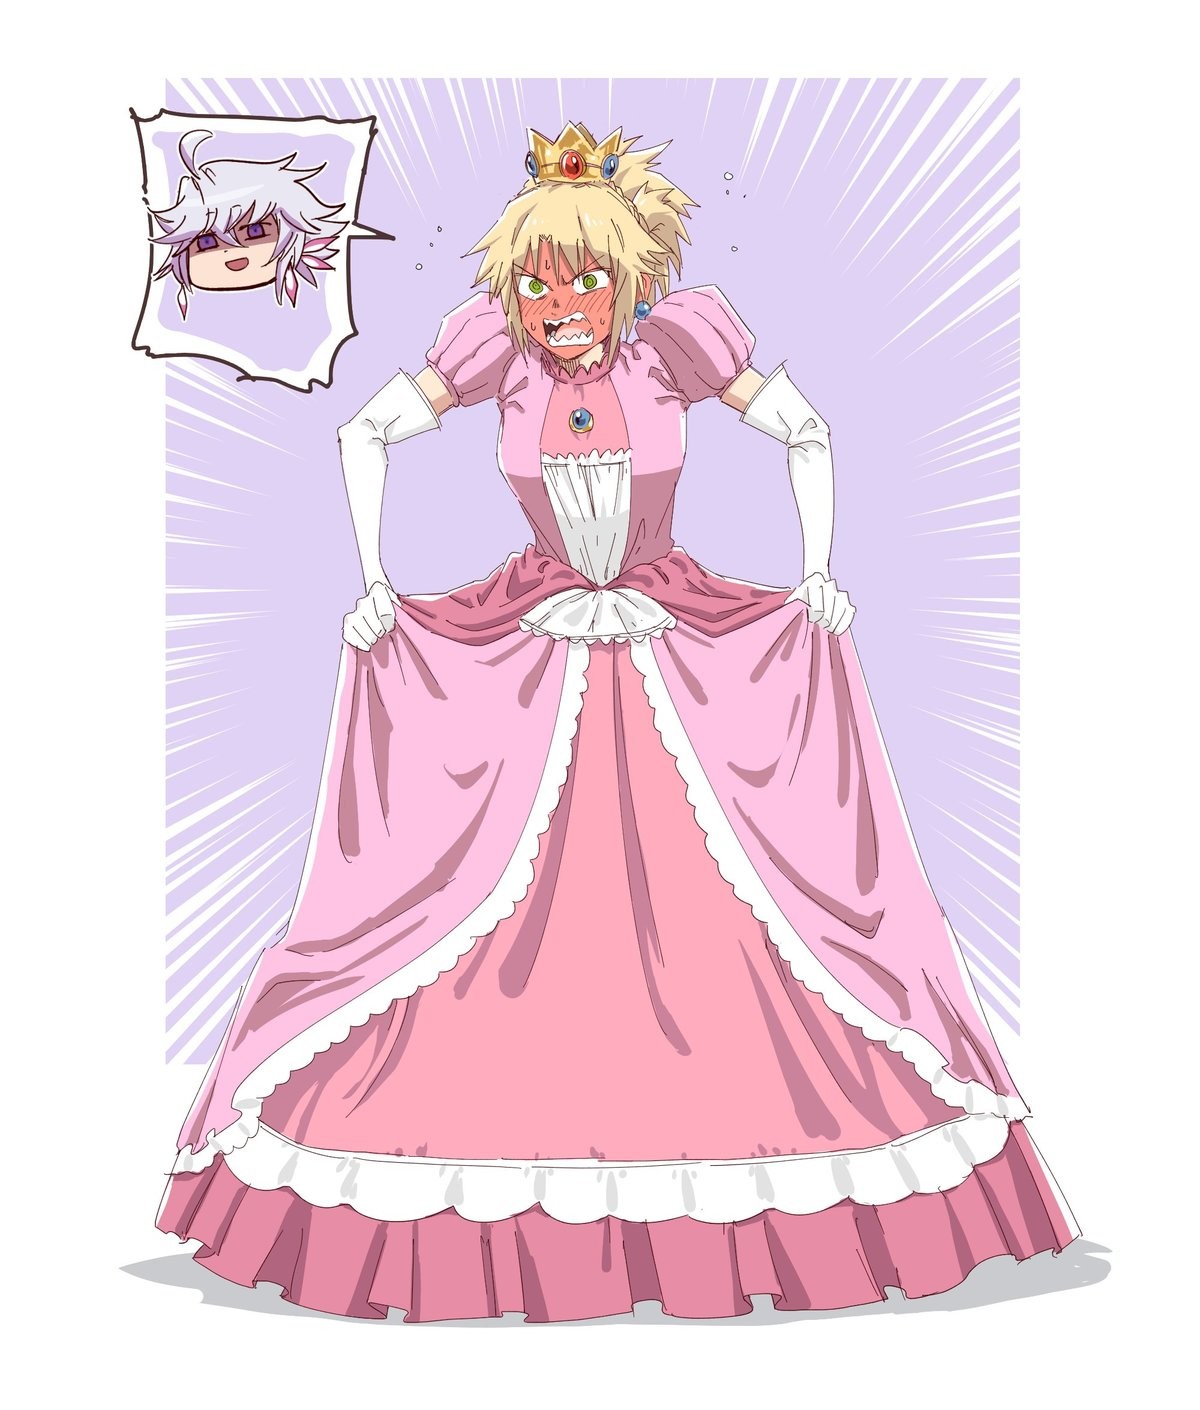 Princess Mordred. Source join list: Fate (425 subs)Mention History join list:. I can't tell if this is implying that taht's Merlin in the dress, or merlin put the crown on mordred to screw with her. I'd wager it's the latter.